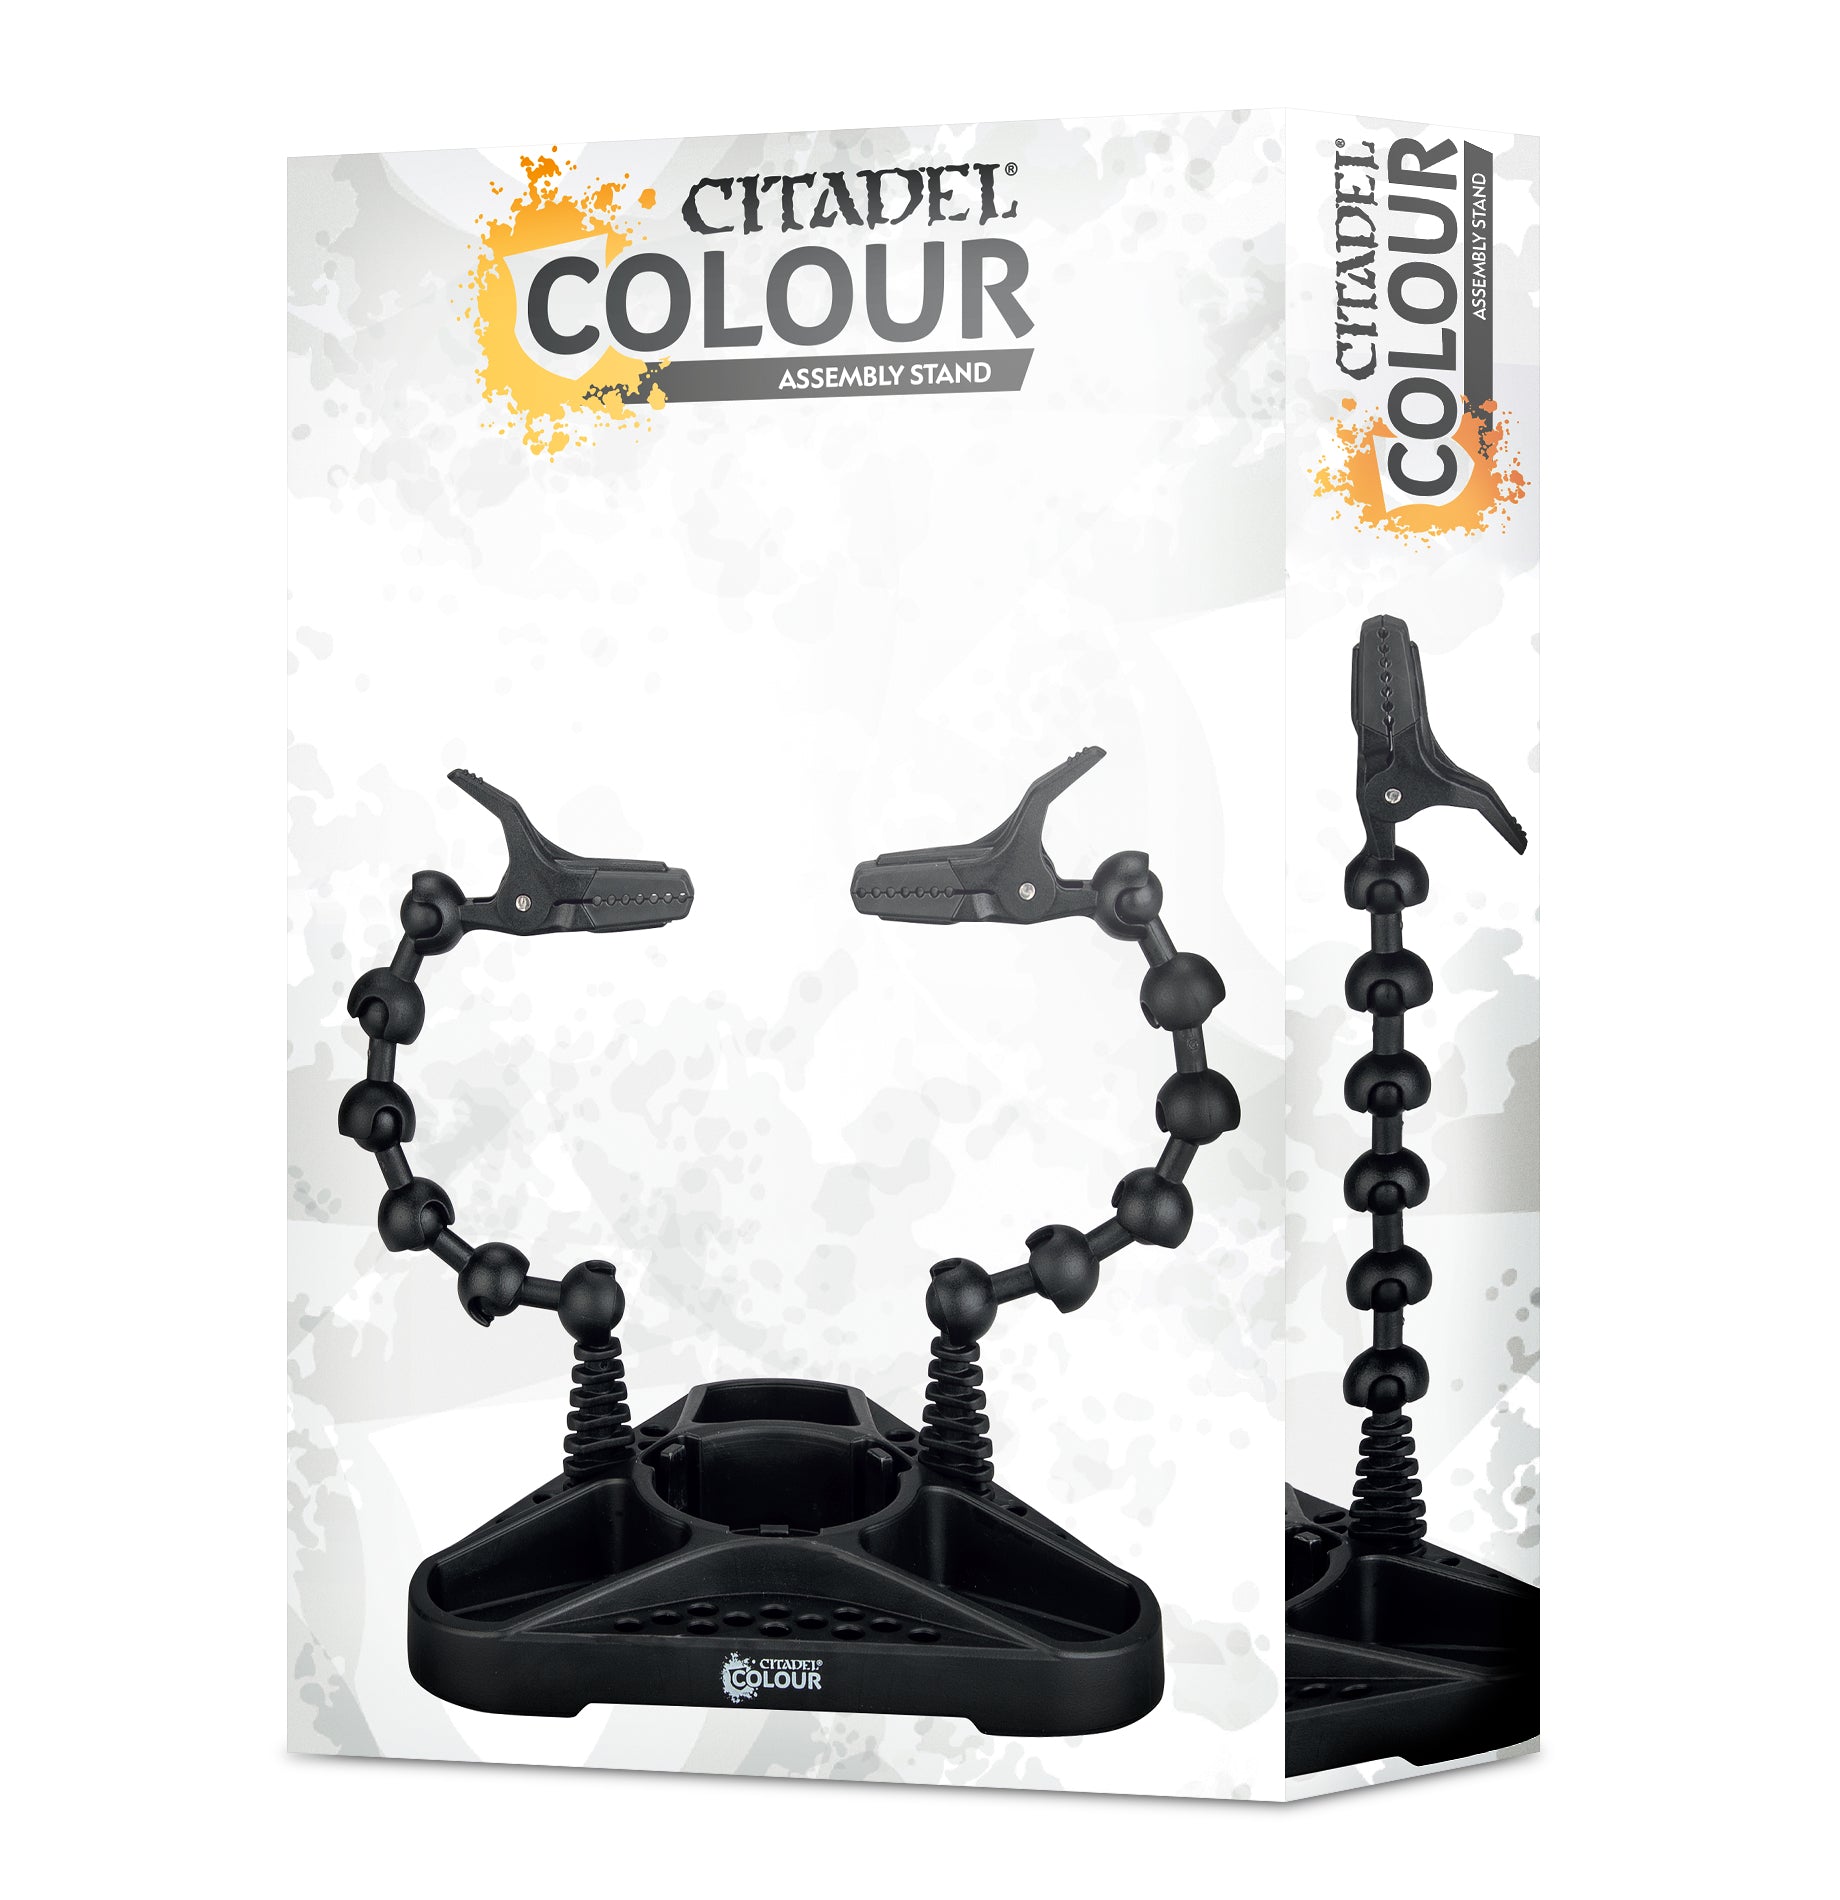 Citadel Colour Assembly Stand | Lots Moore NSW